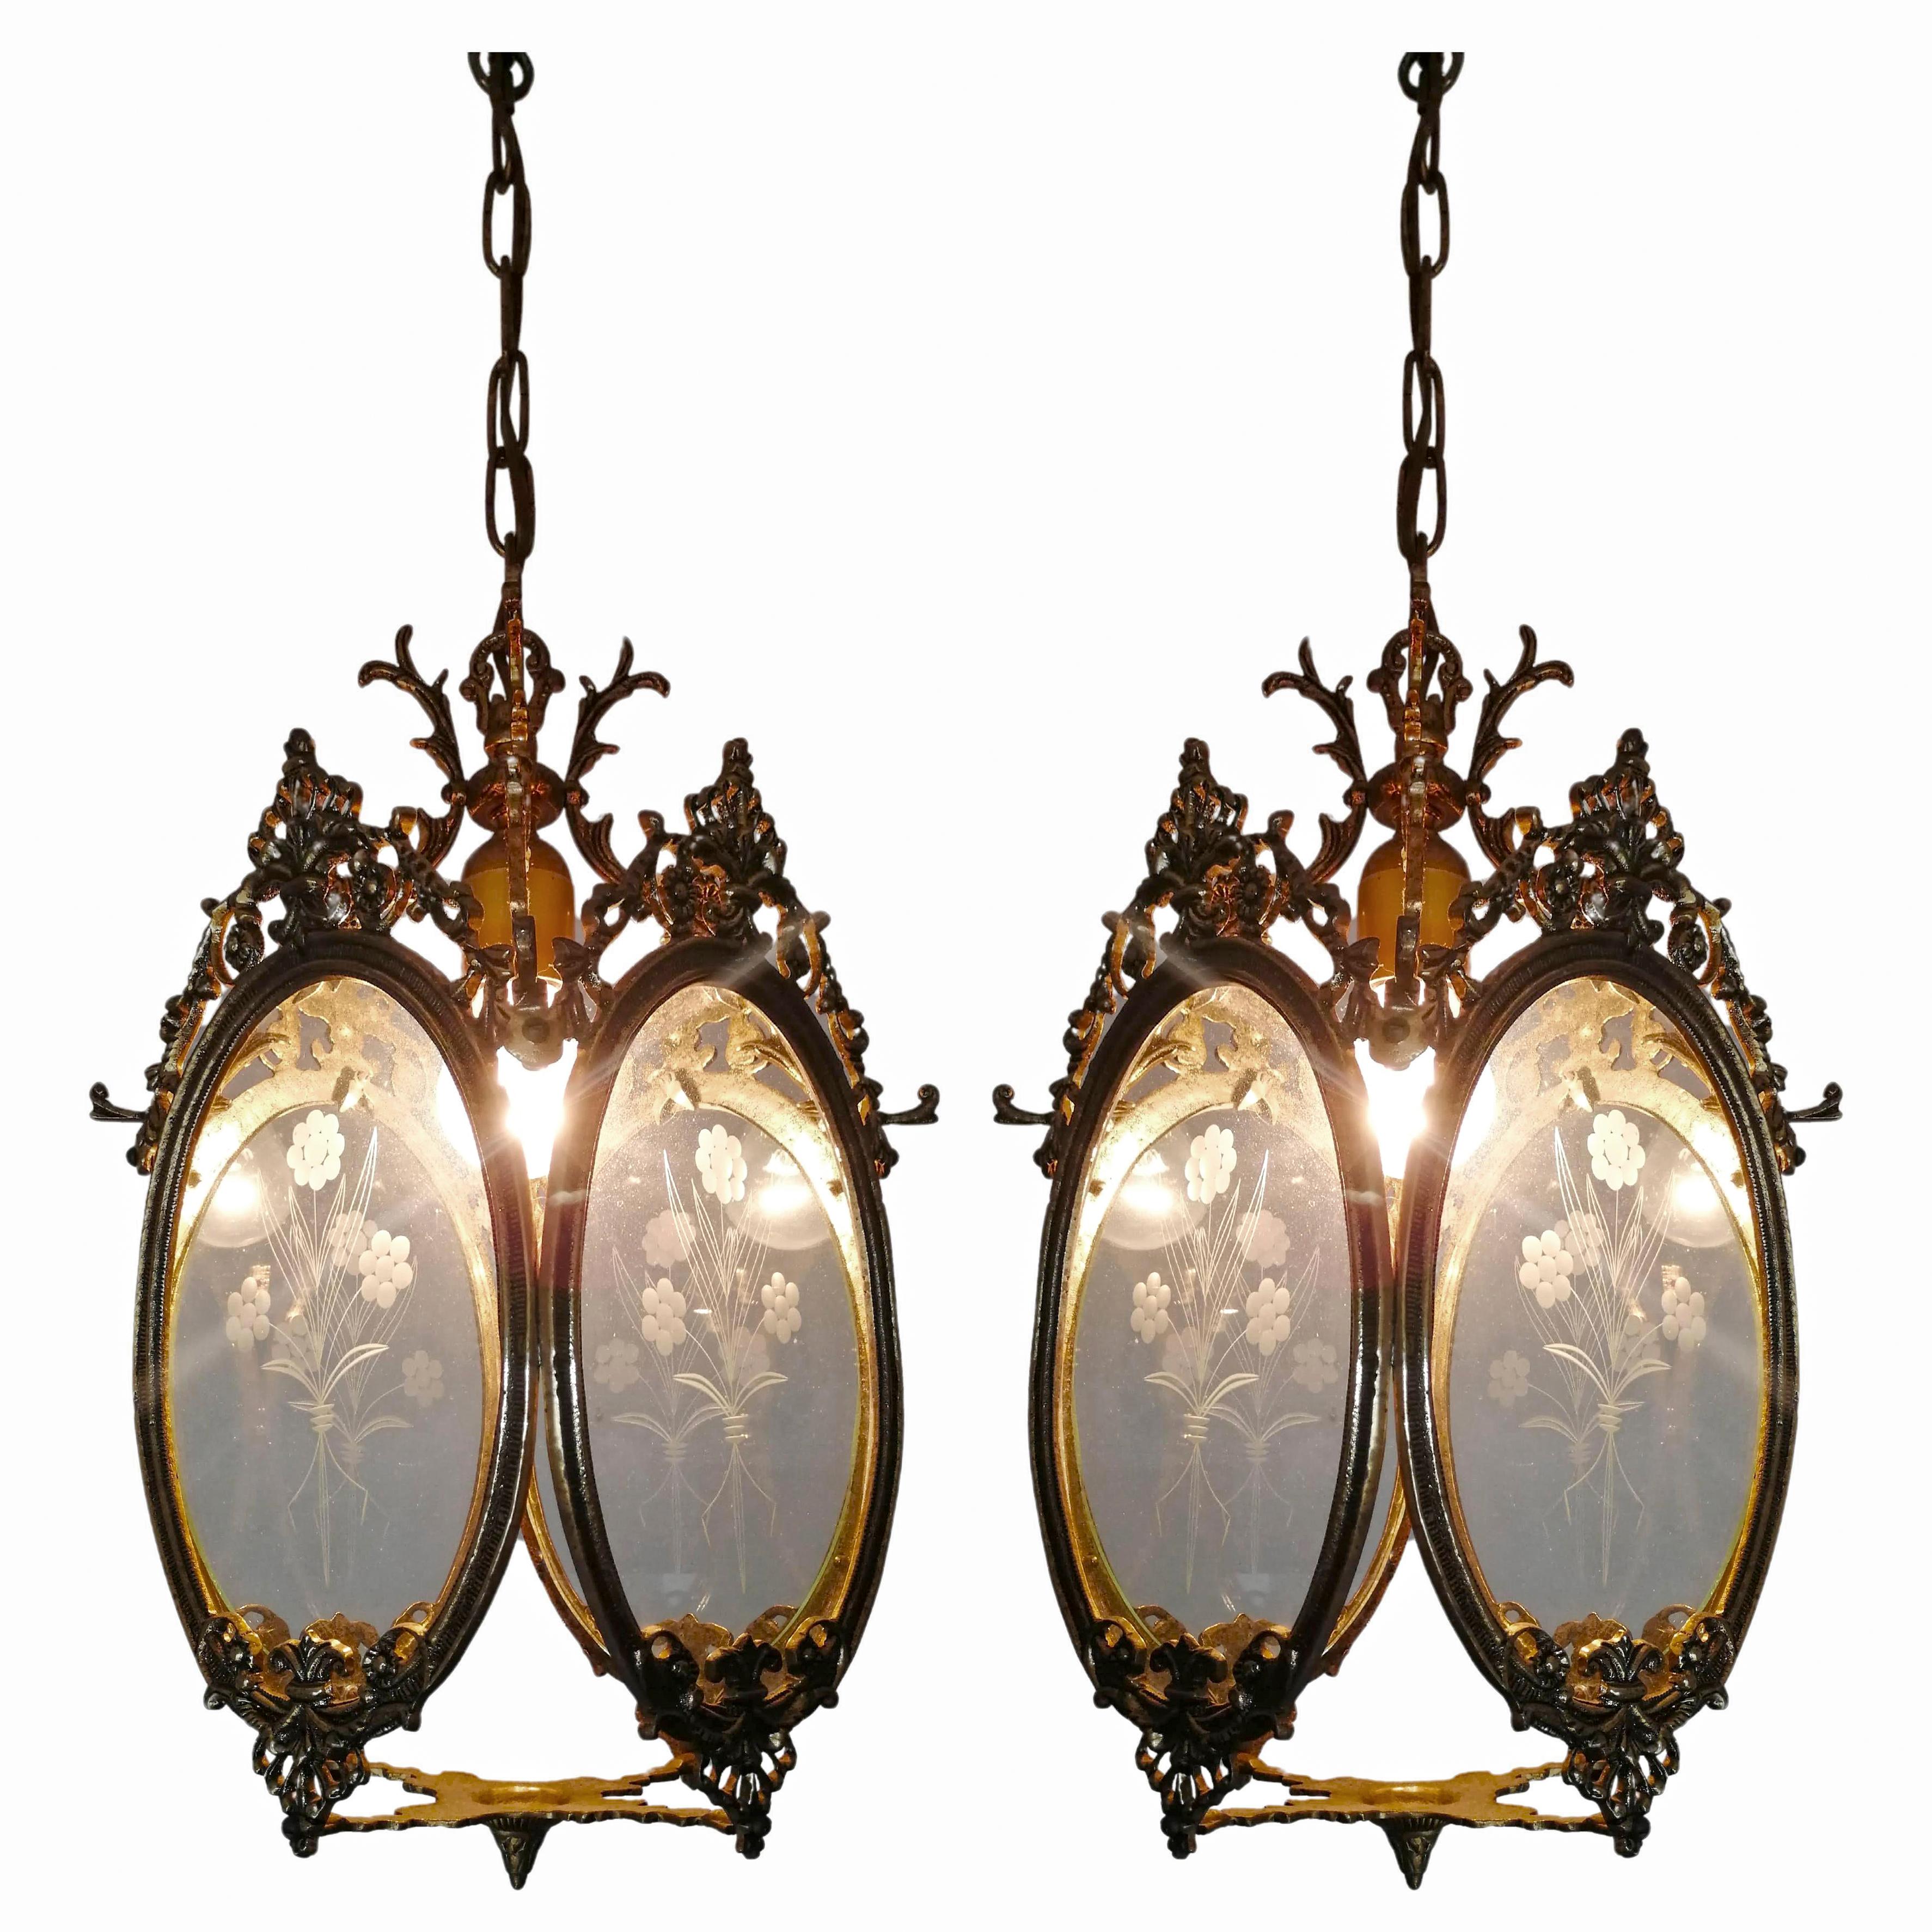 Pair of Antique Louis XVI French Lanterns Chandeliers in Gilt Bronze & Cut Glass For Sale 3